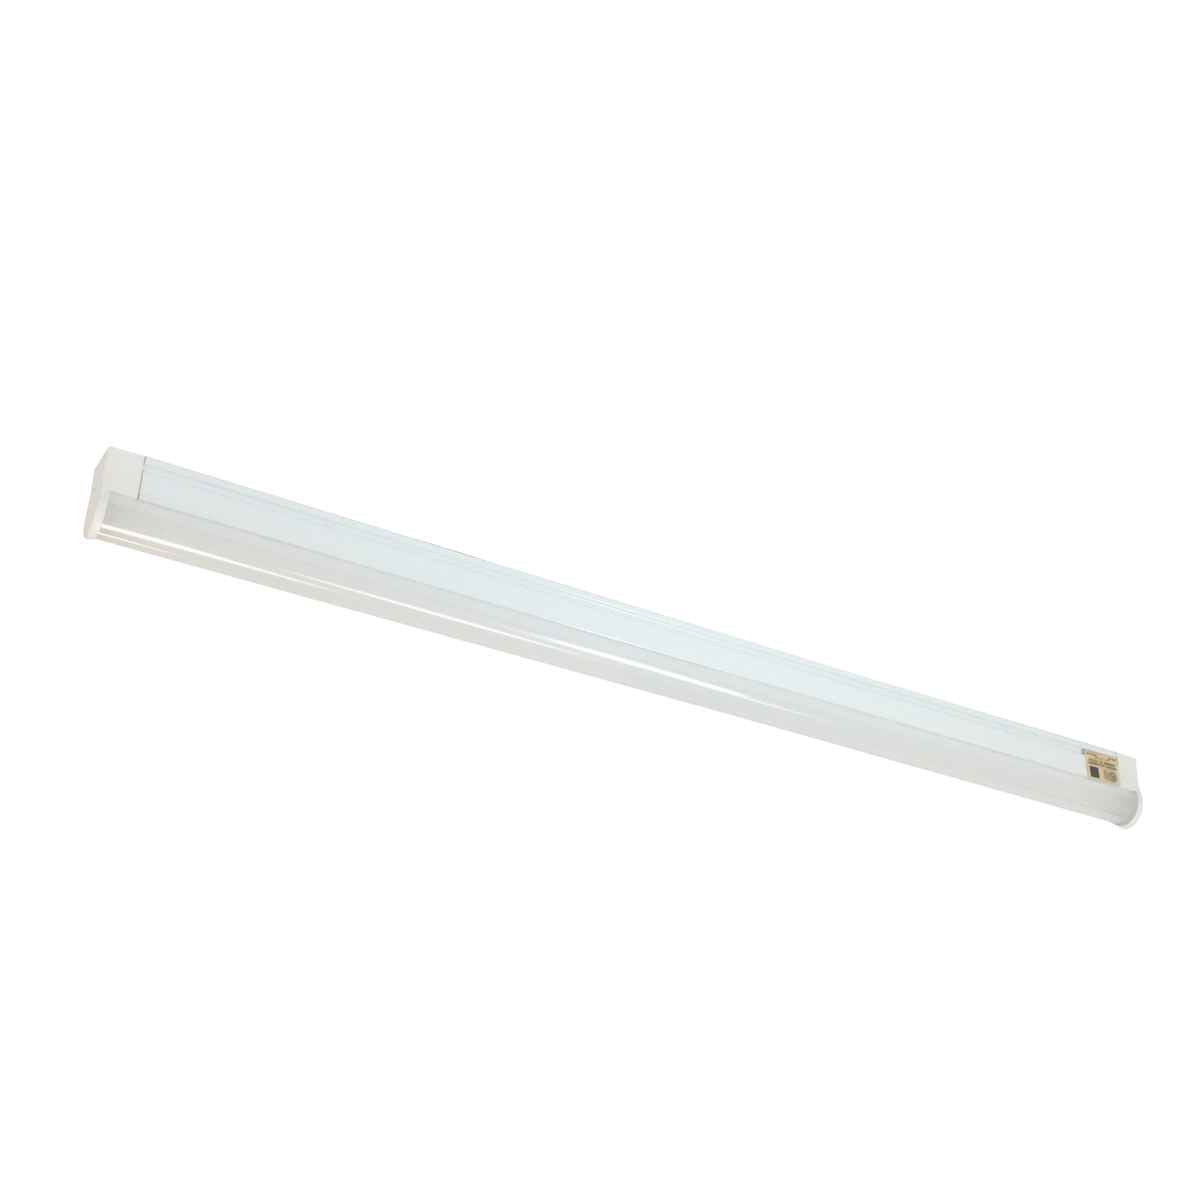 Picture of Nora Lighting NULS-LED2140W 21 in. 4000K Undercabinet Linear LED Fixture - White